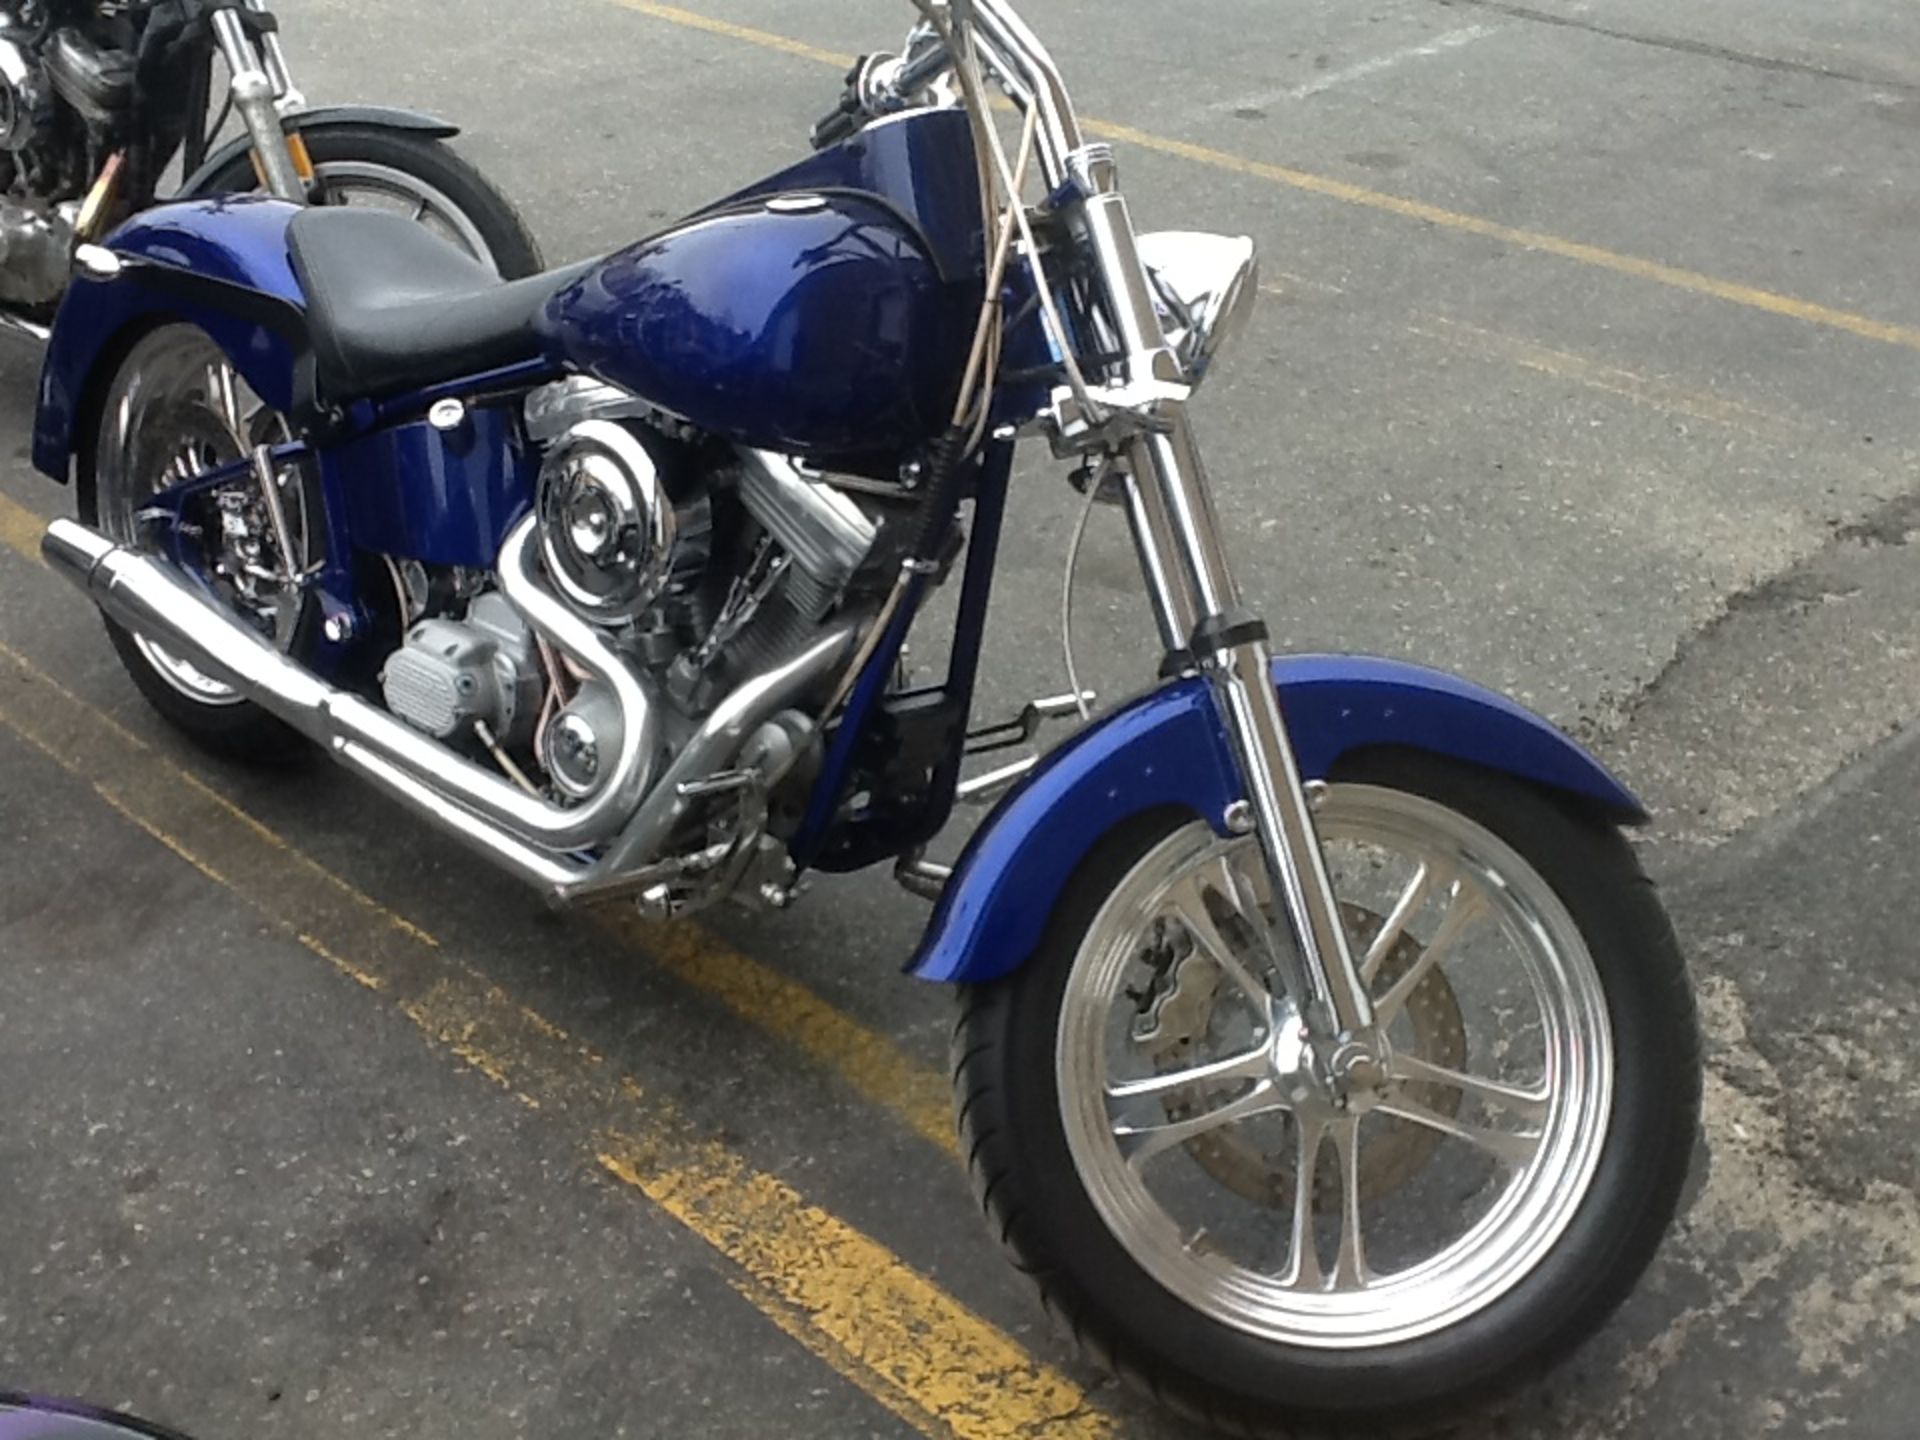 2002 Harley Davidson Softail Custom Special Construction with High Performance 80 Cubic Inch 2